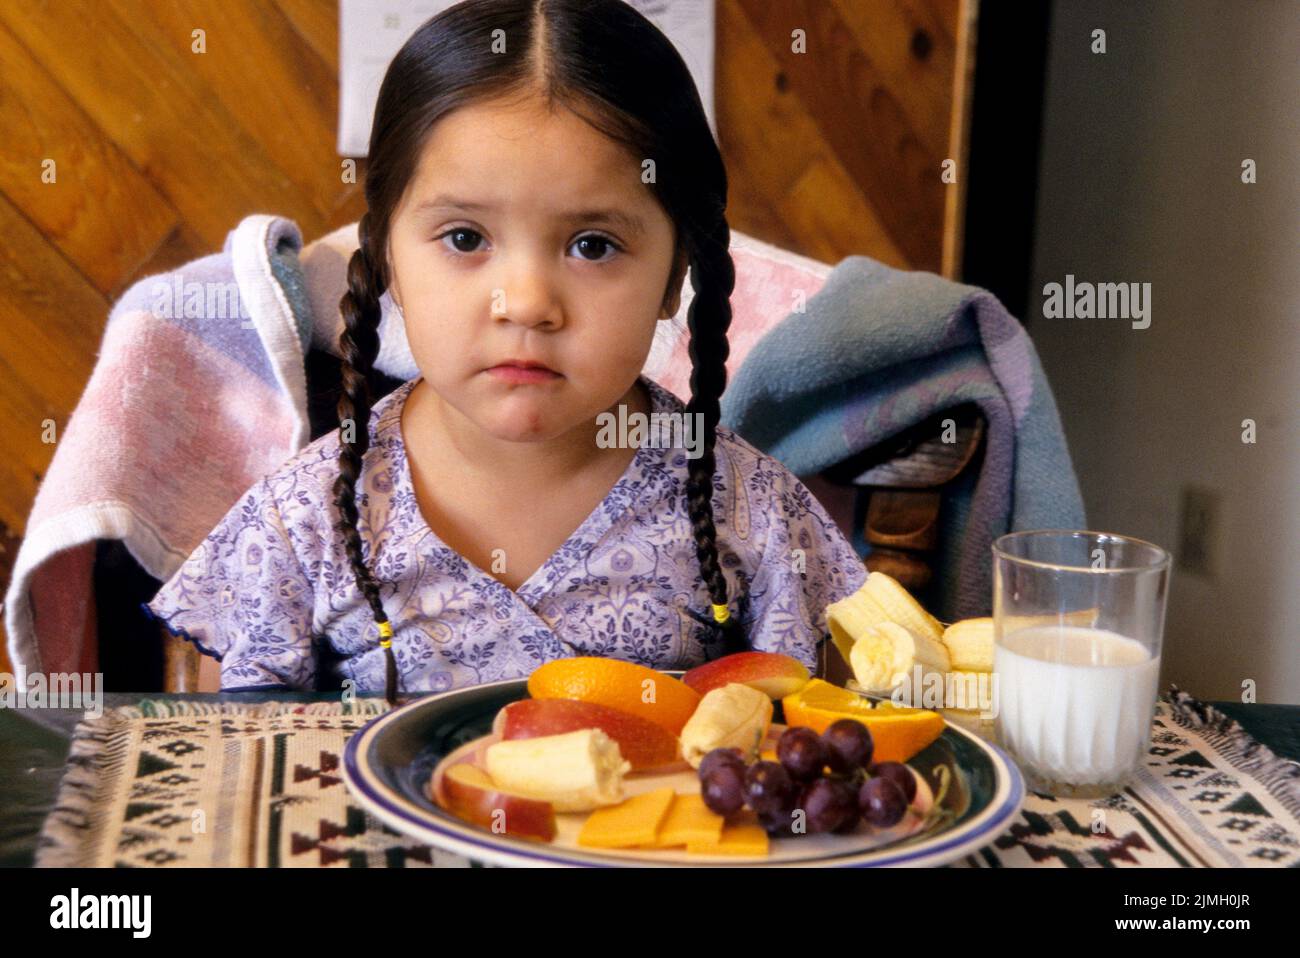 of milk, banana, apple, oranges, grapes and cheese while sitting at a table. Shoshone Bannock Indian Reservation, Fort Hall Idaho Stock Photo